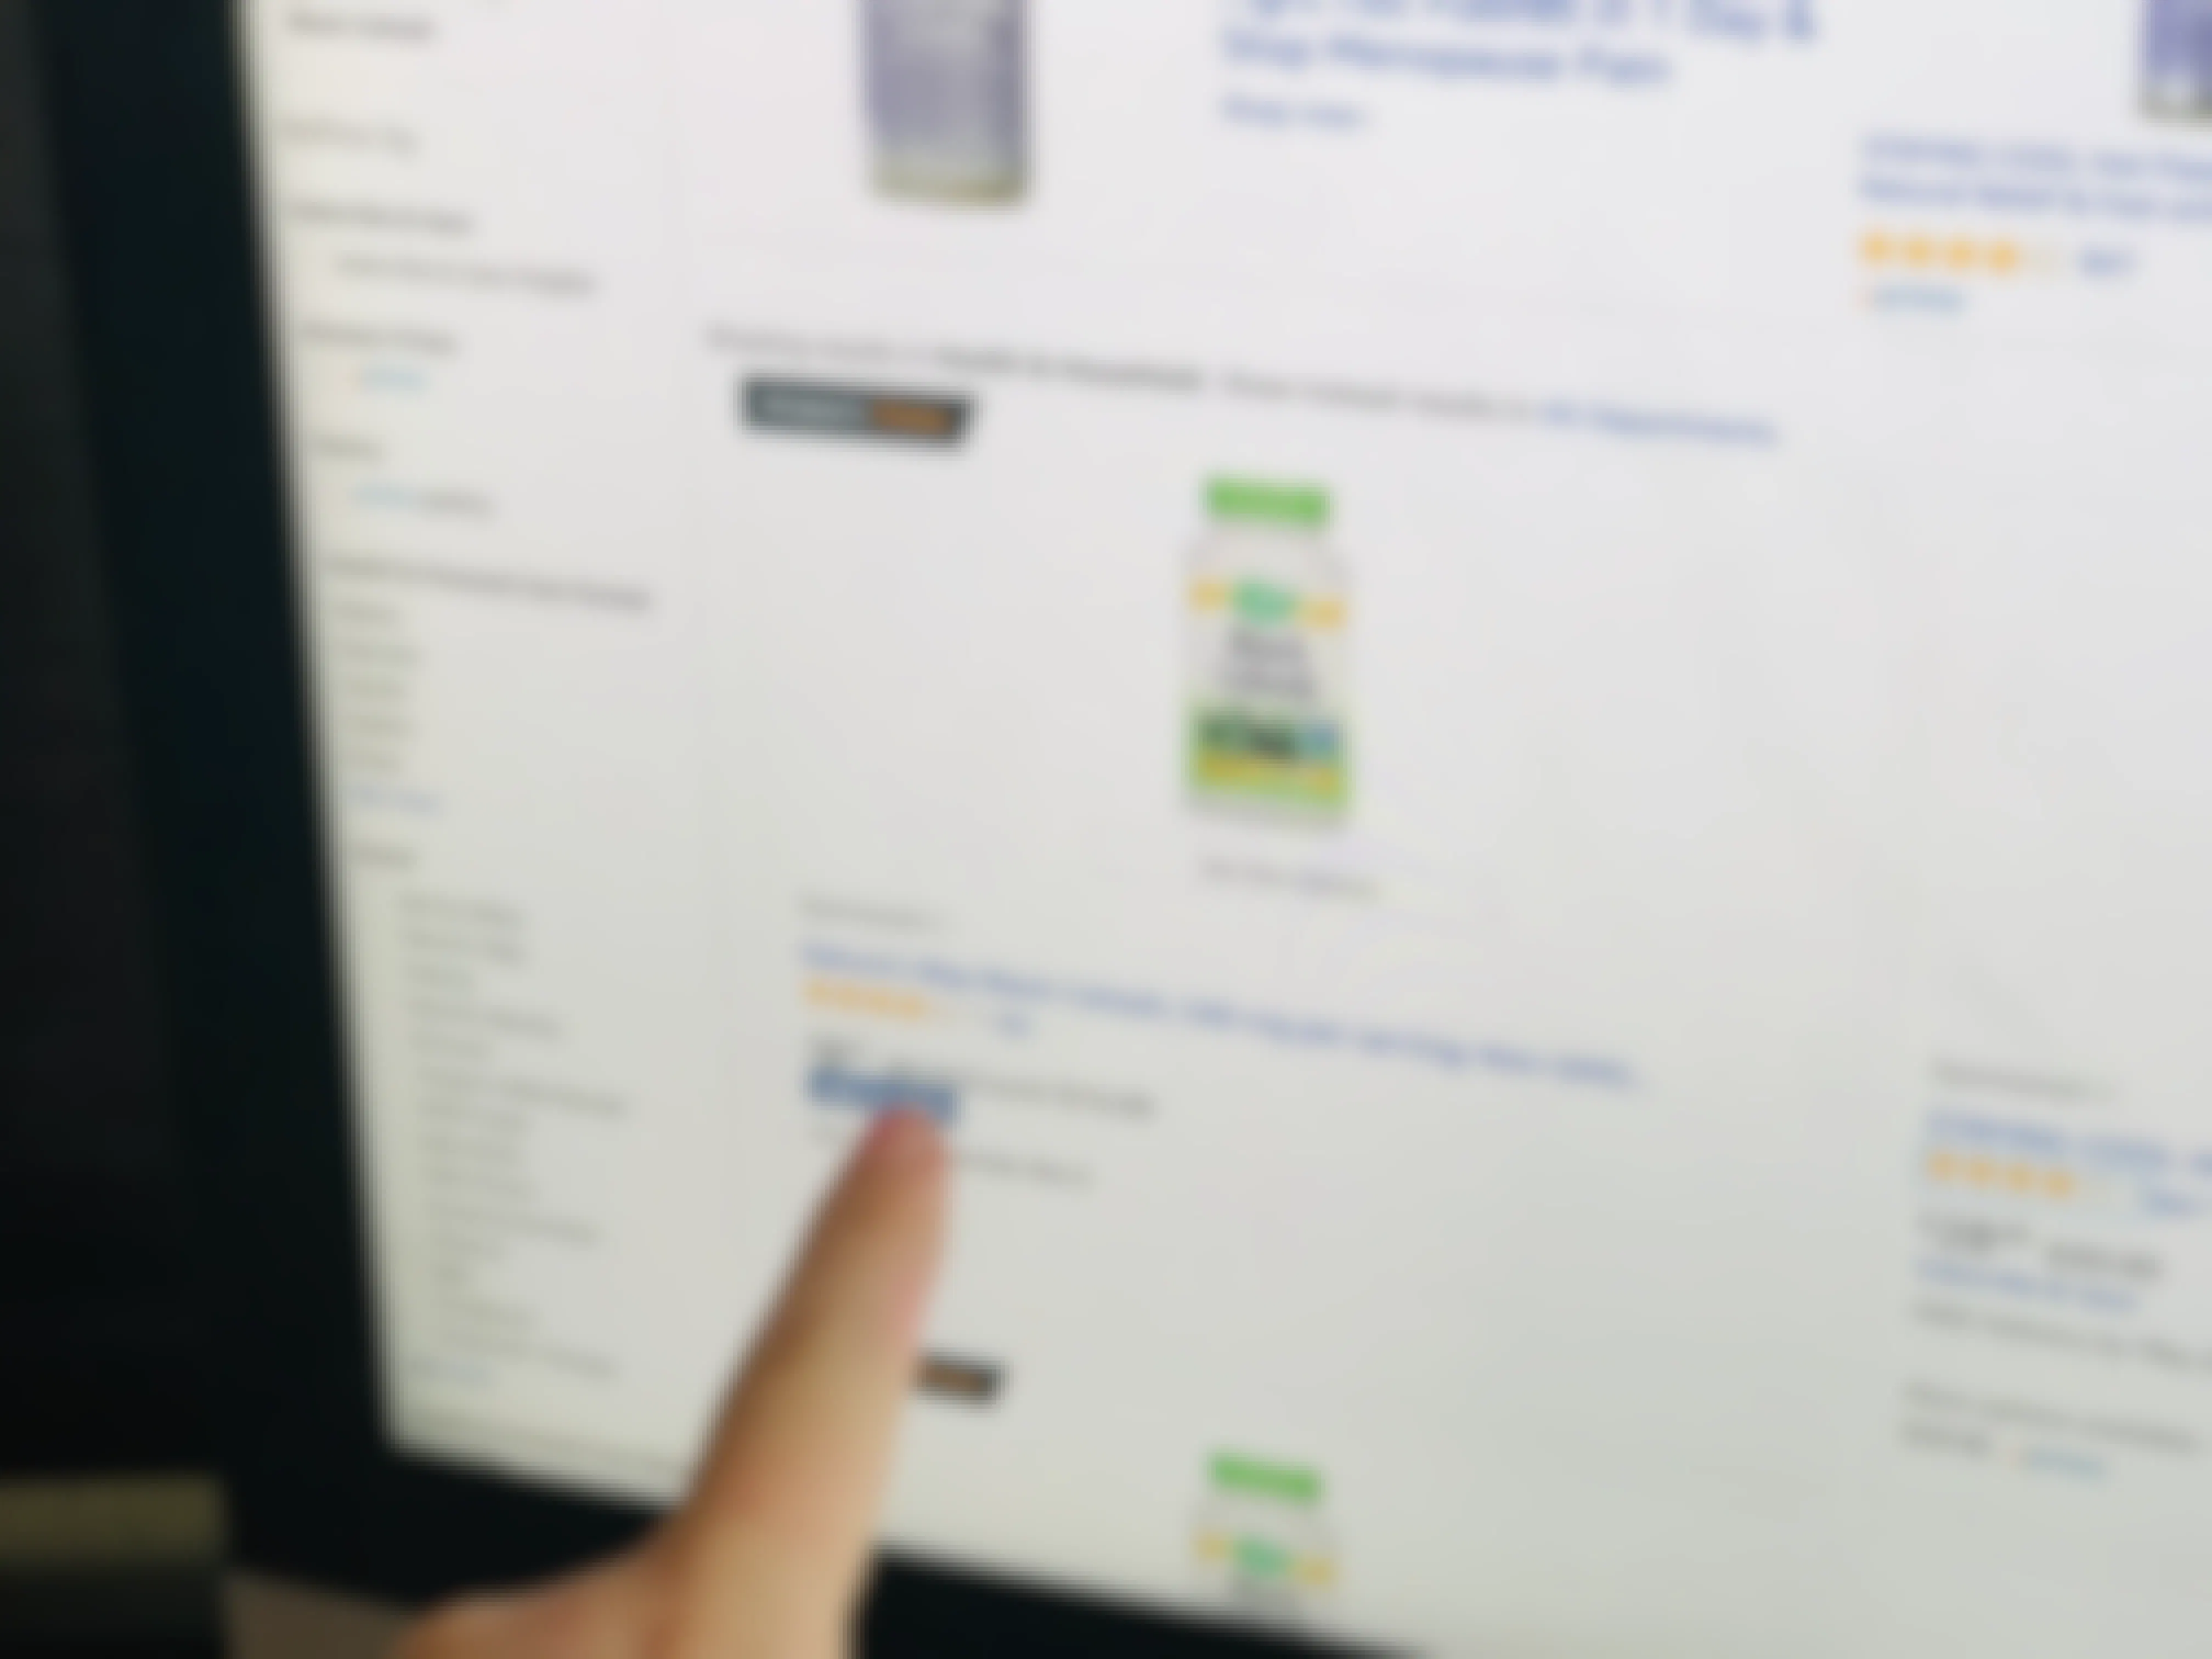 A person pointing out "add-on item" on an amazon webpage screen.